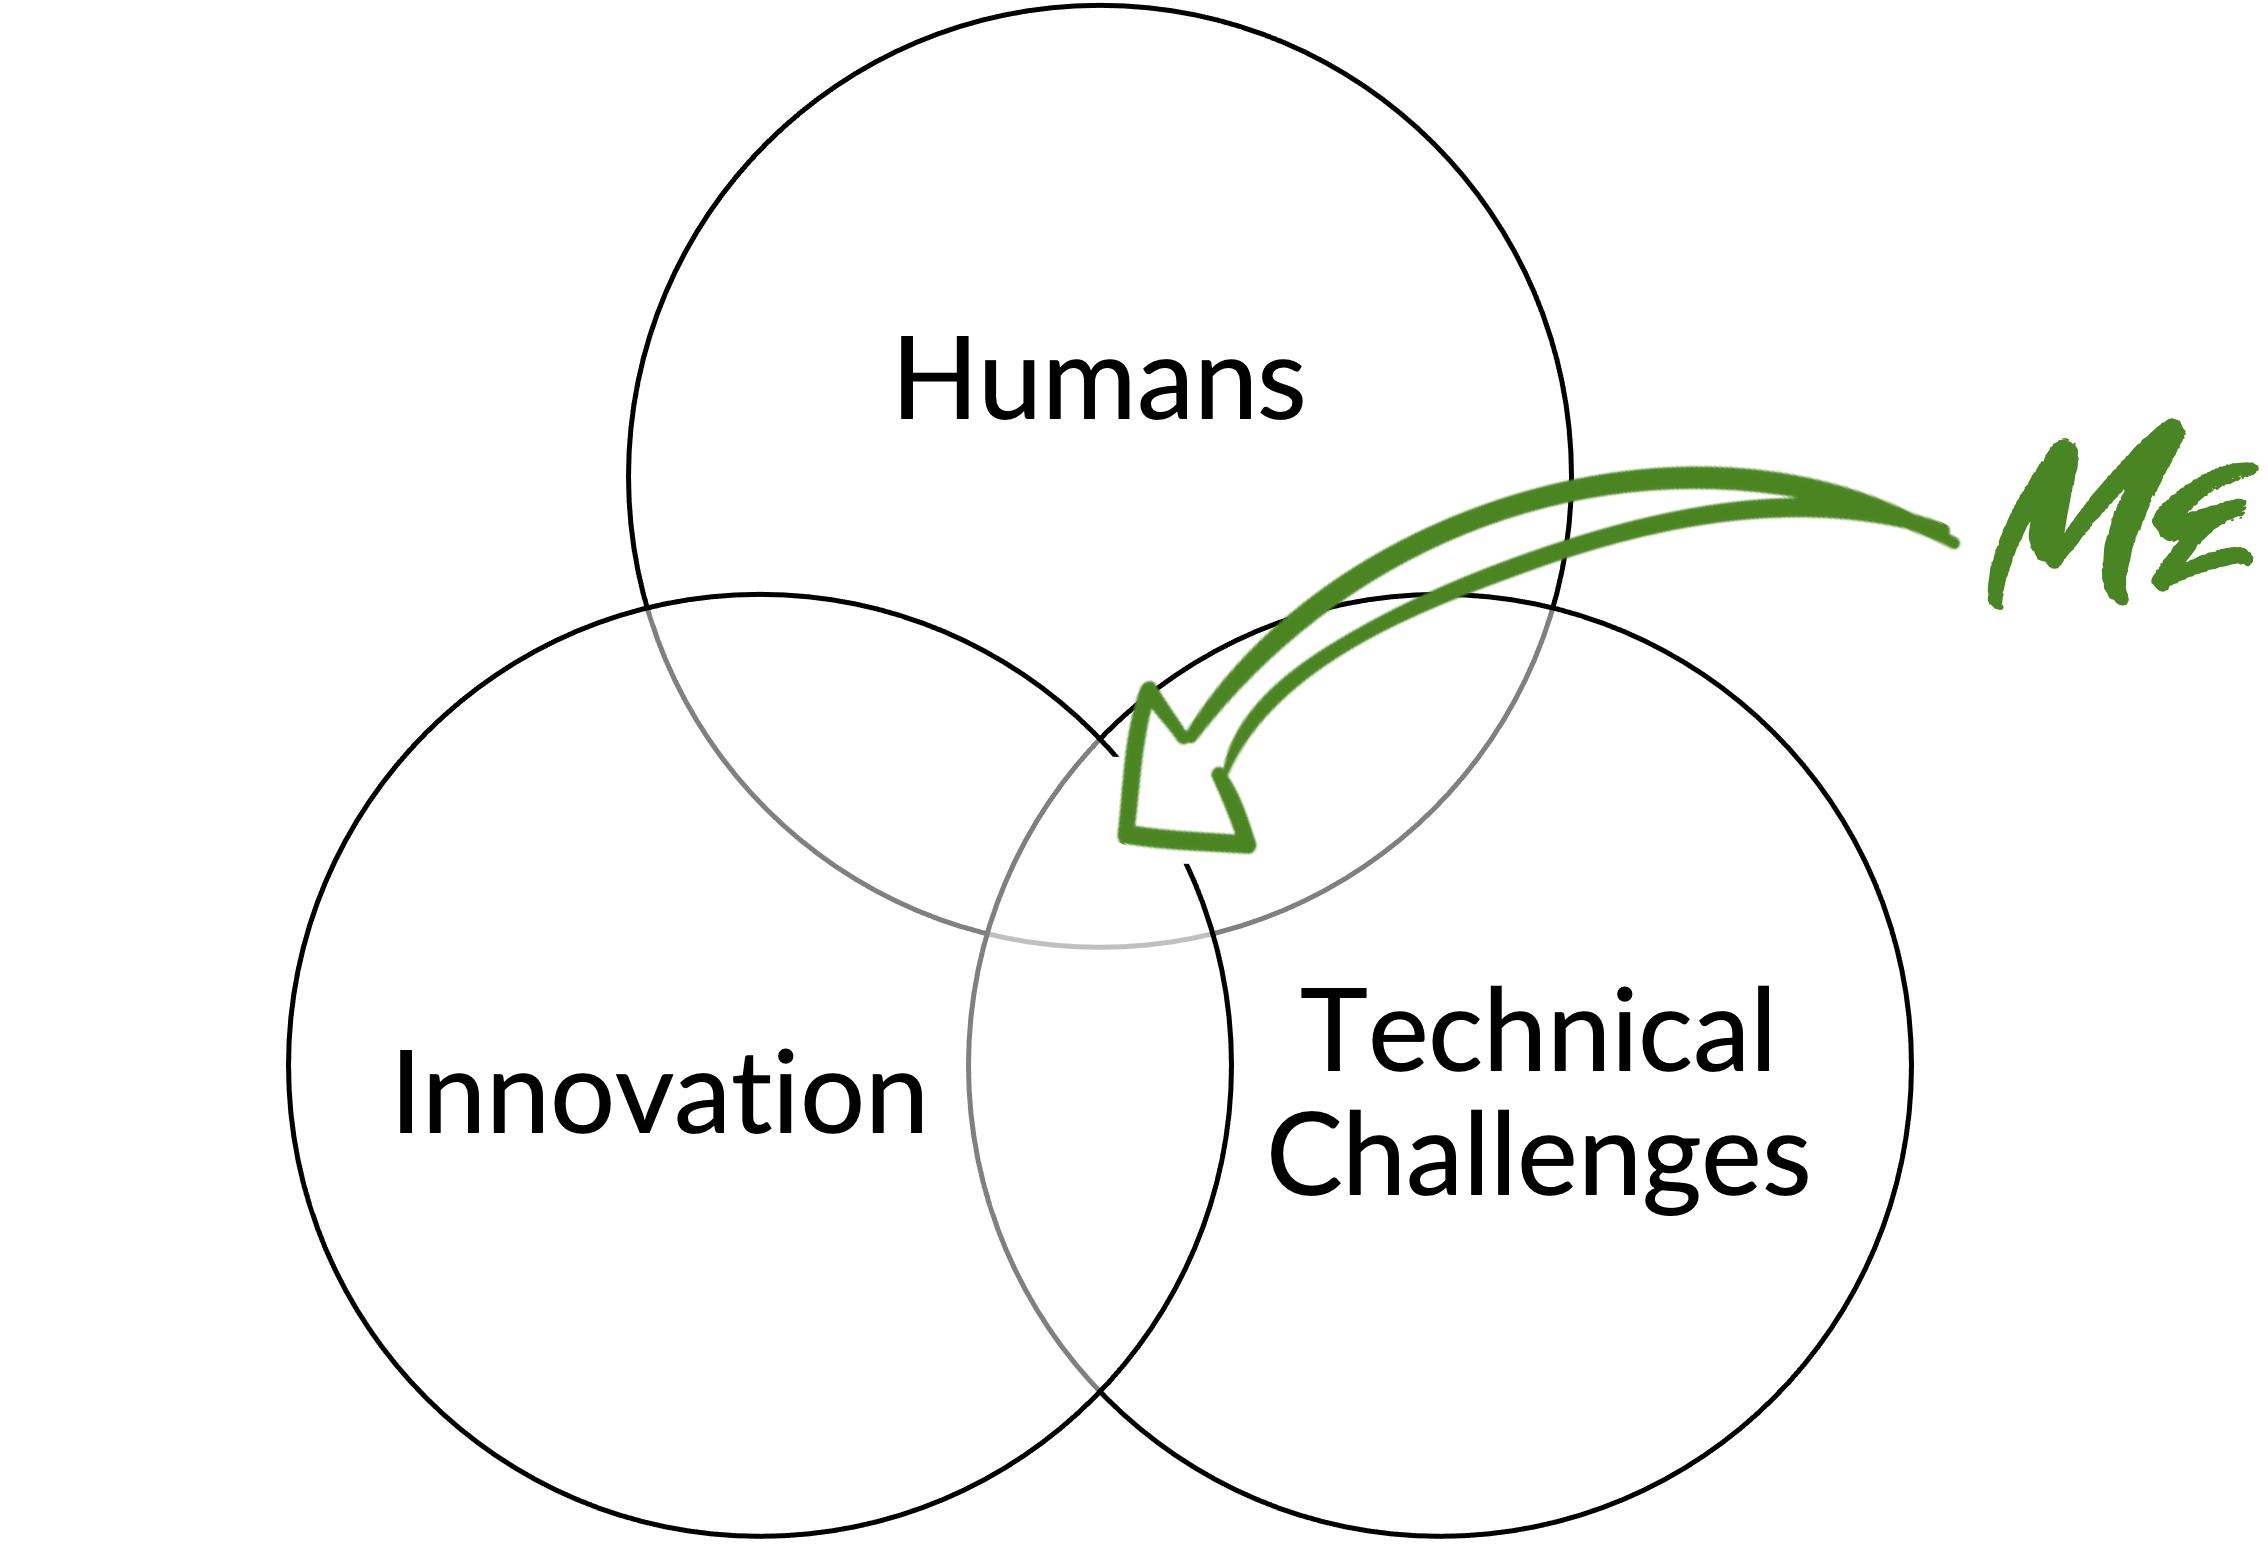 Venn of my profile - Humans - Technical Challenges - Innovation